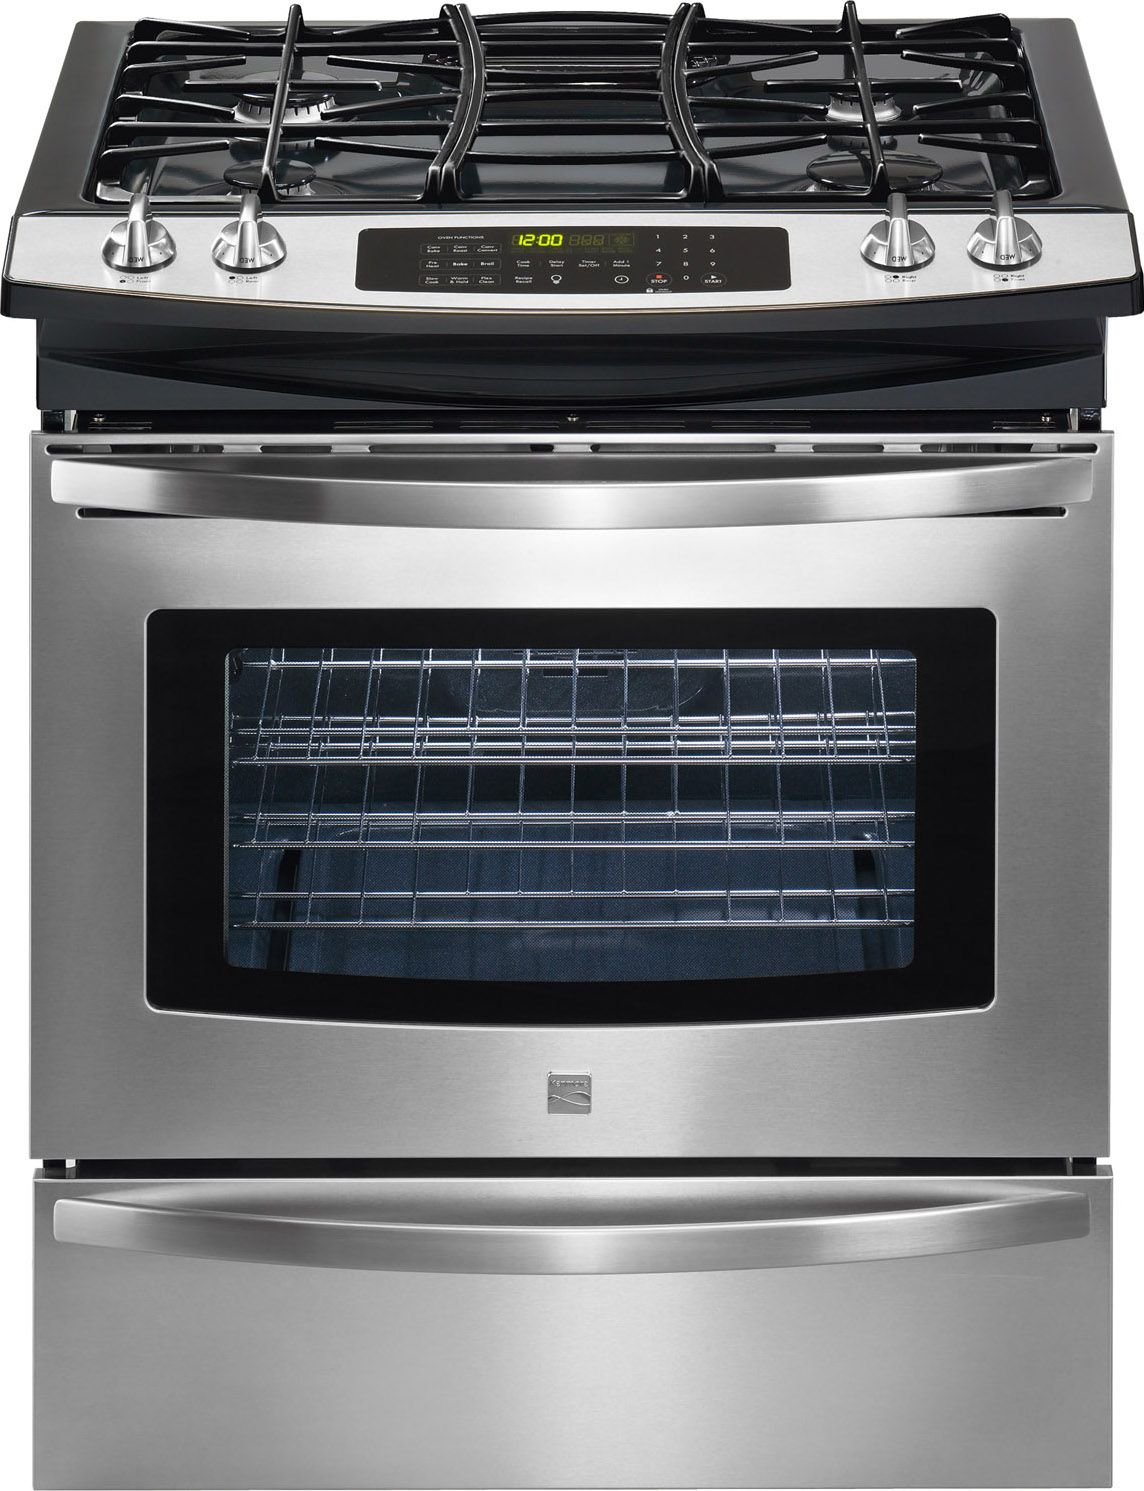 Kenmore 30 Gas Self Clean Slide-In Range with Convection Cooking Stainless Steel